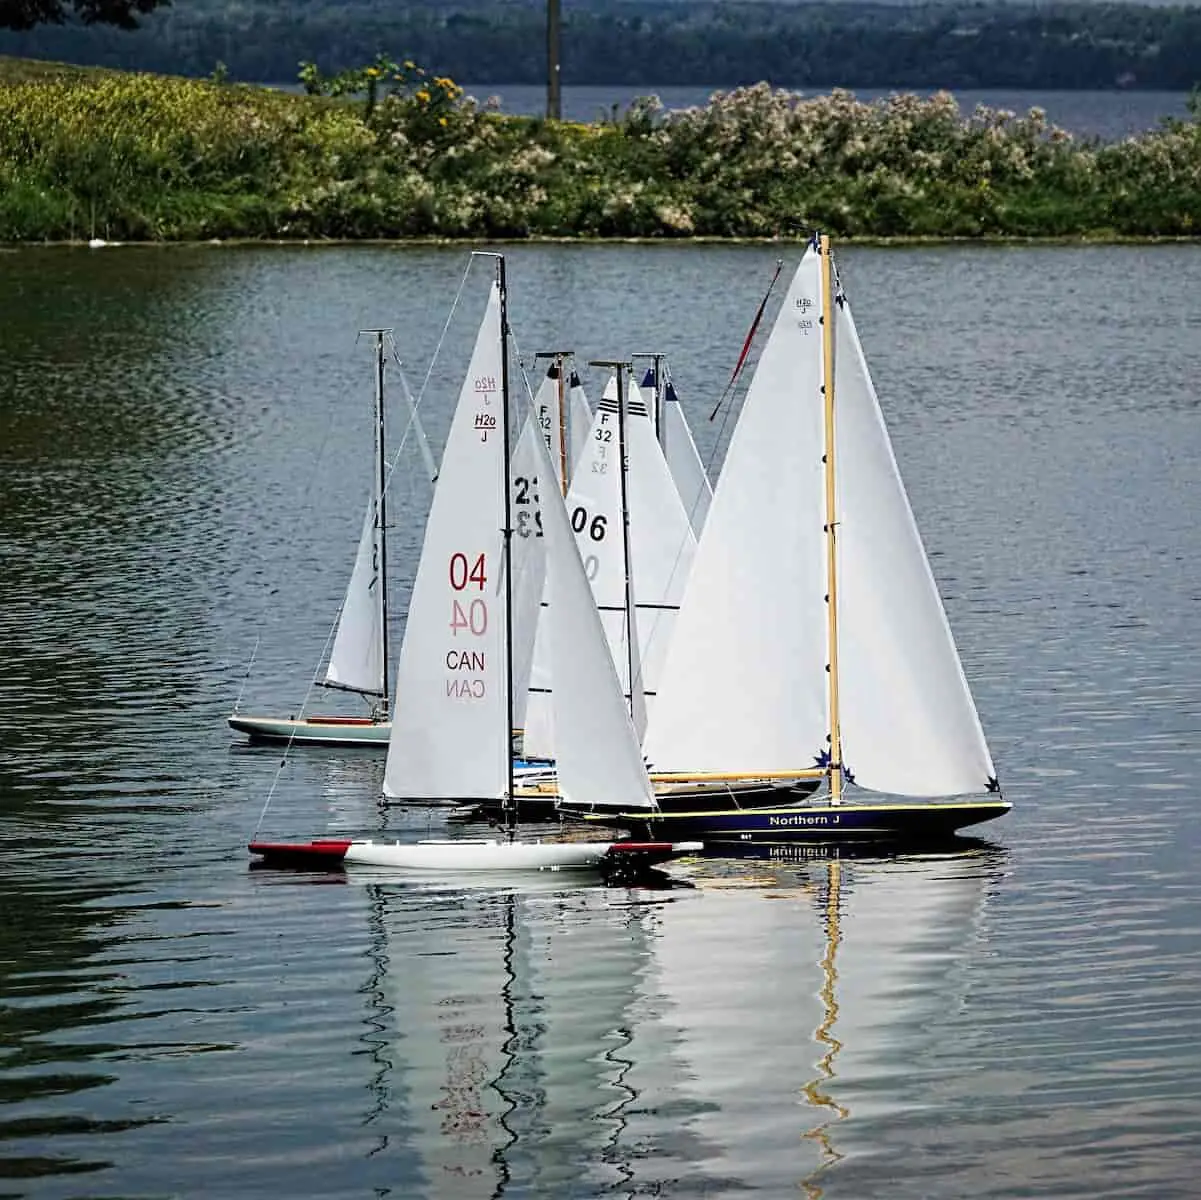 How sailing works - a fleet of sailing boats